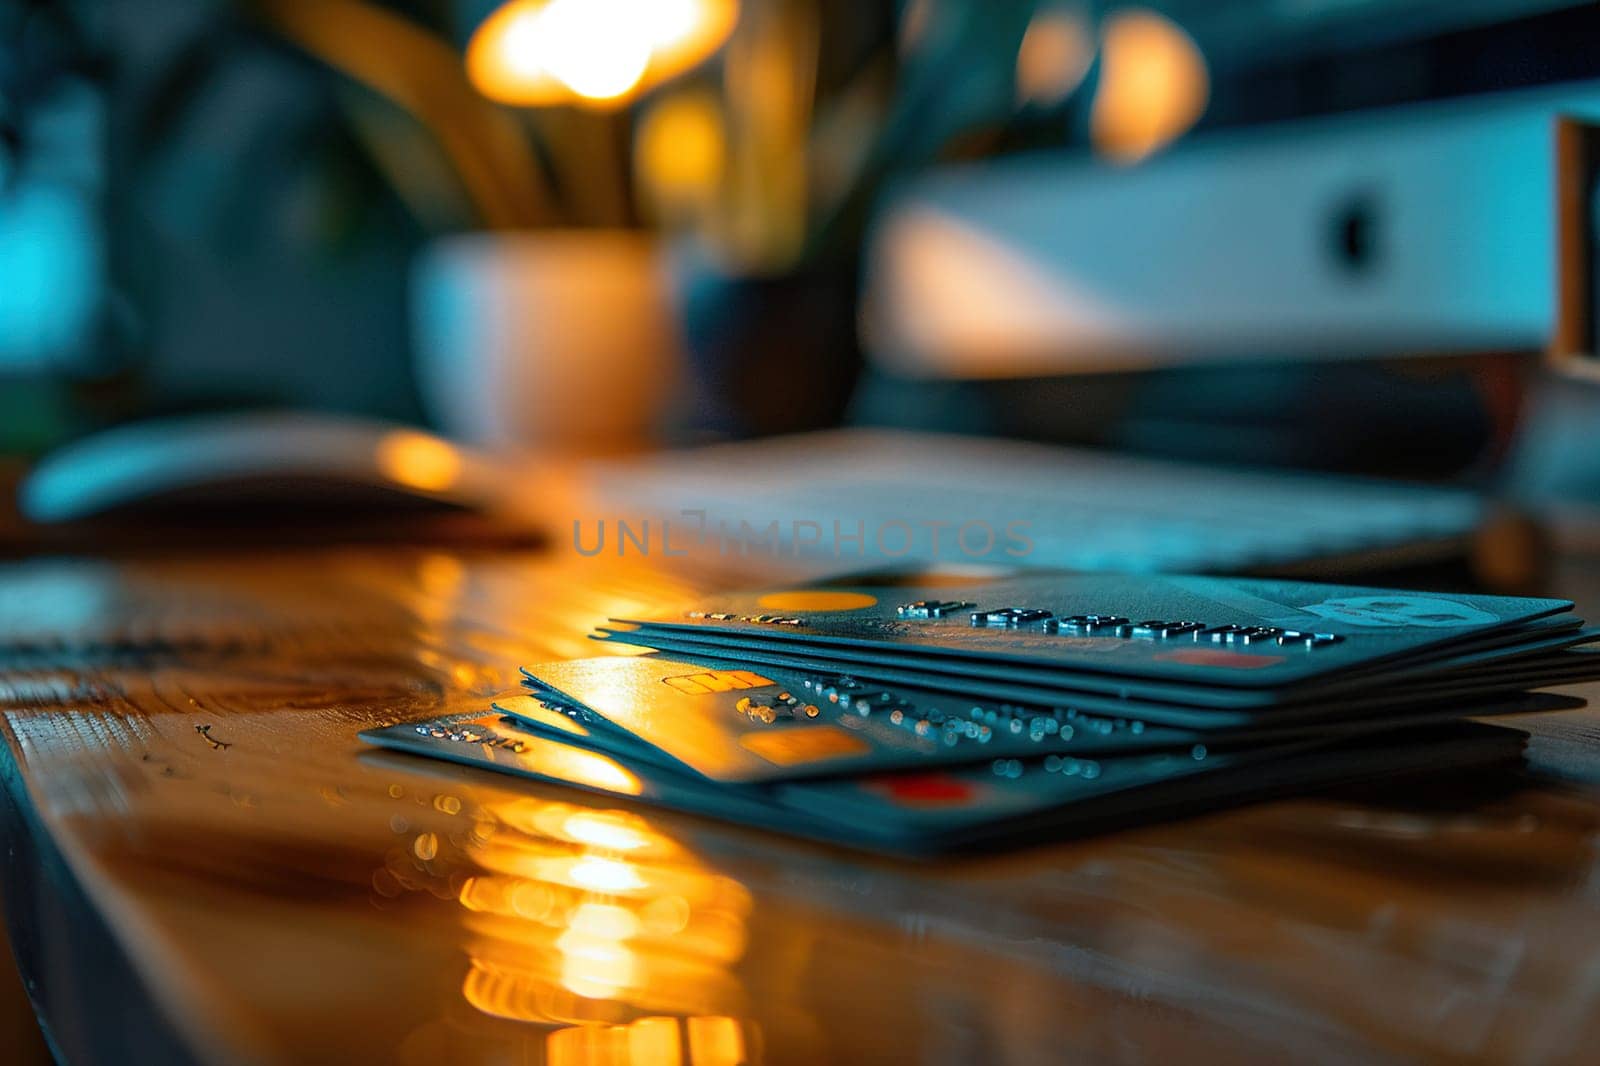 Bank credit cards on office table with laptop.